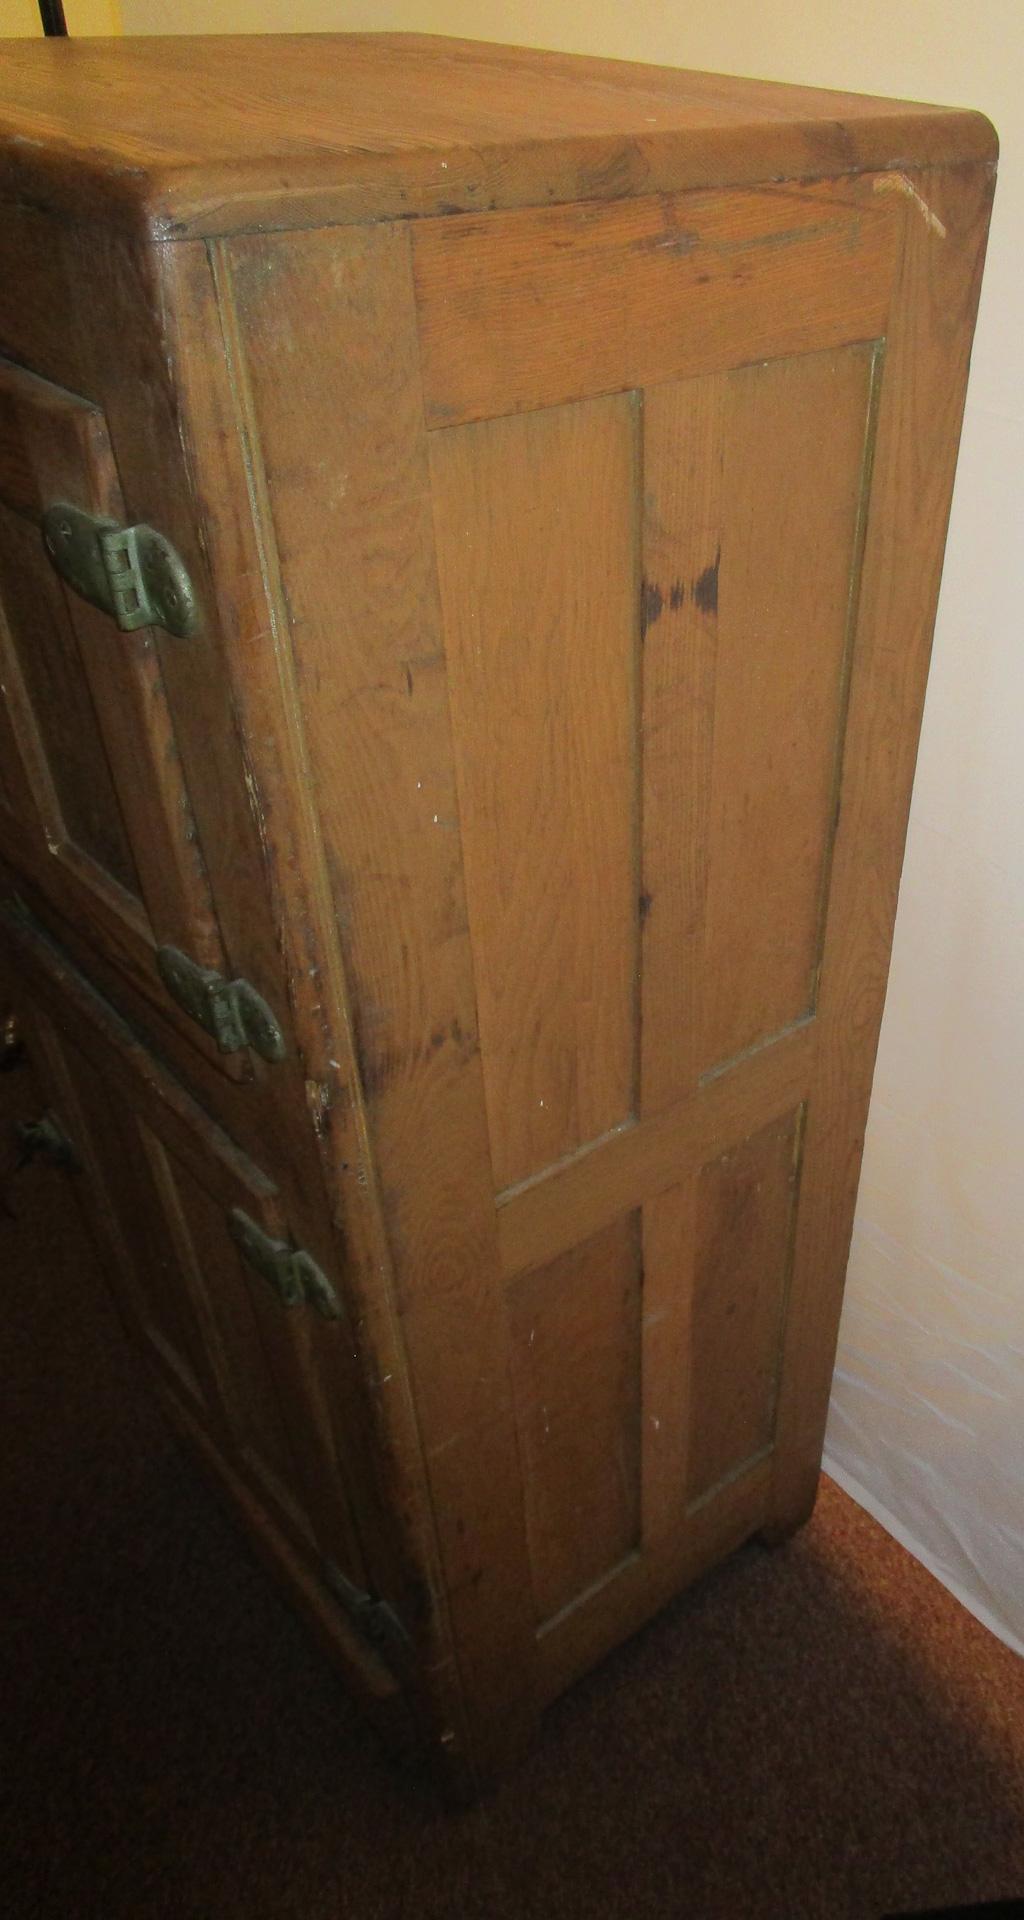 This Antique ice box or cooler is constructed from solid oak and was the refrigerator of the late 1800s and early 1900's.

The front top door opens to reveal a metal lined compartment where large blocks of ice would be placed to cool the unit. The